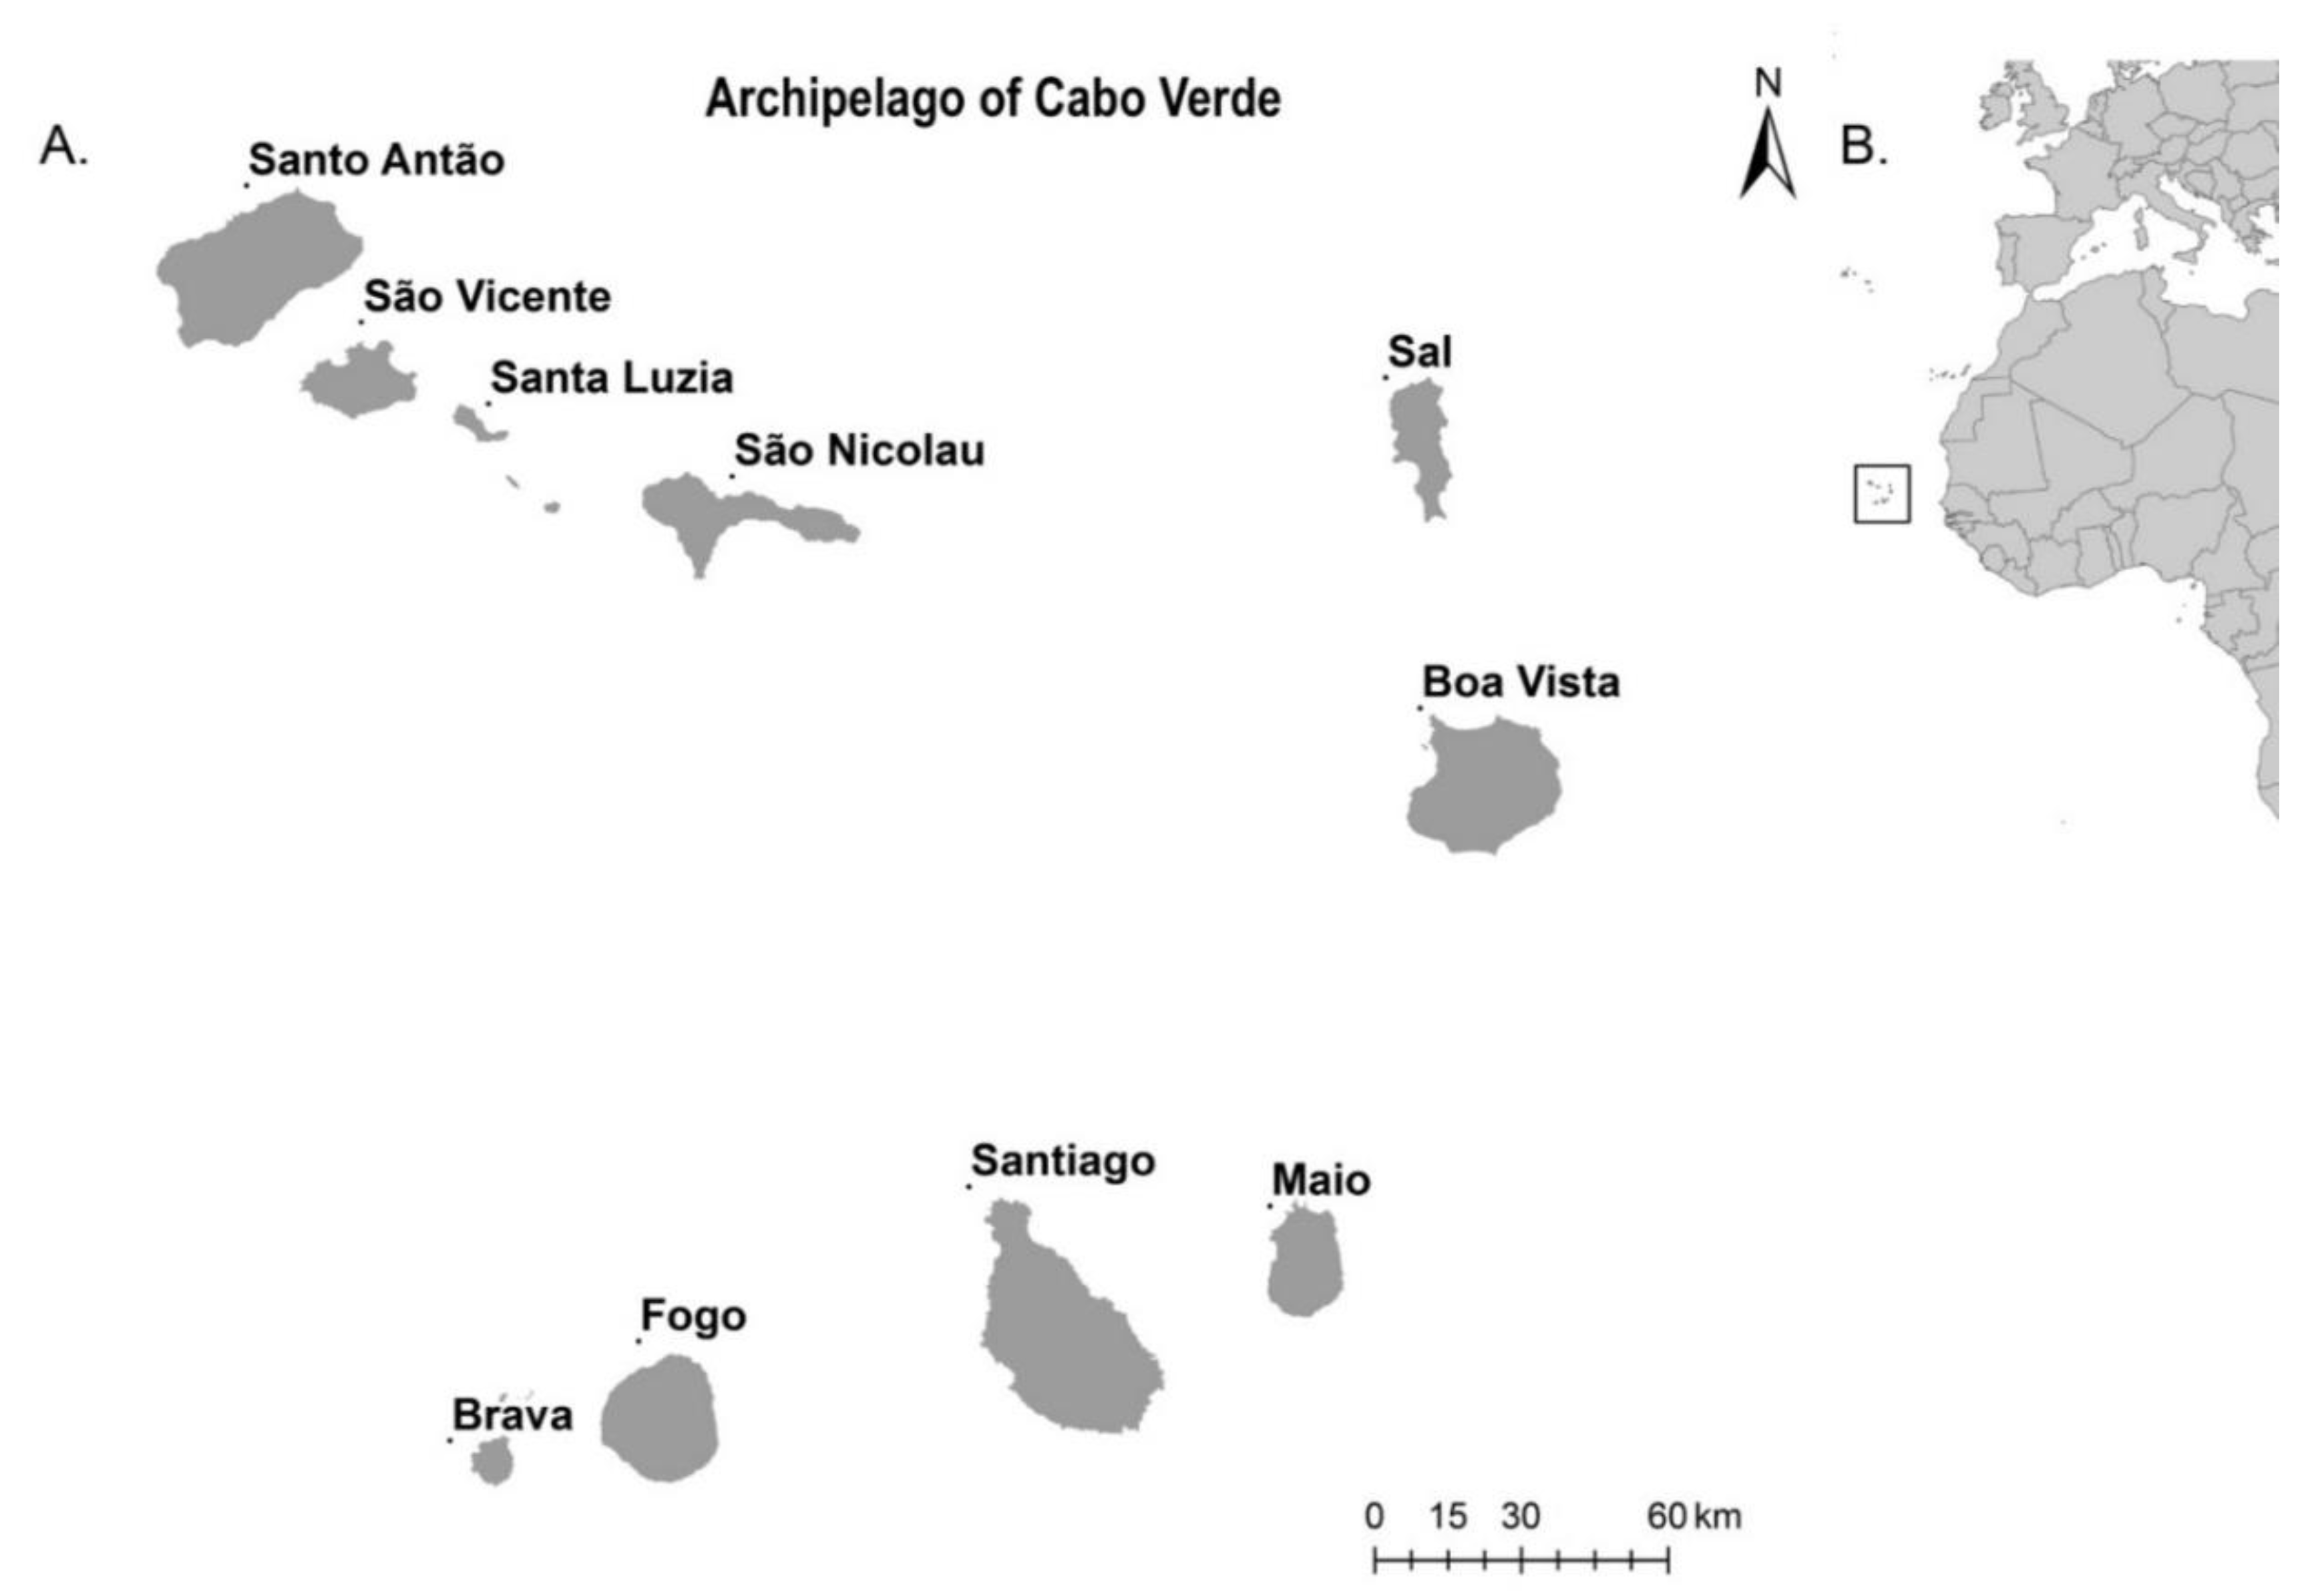 Optøjer Potentiel Rug IJERPH | Free Full-Text | Abundance and Updated Distribution of Aedes  aegypti (Diptera: Culicidae) in Cabo Verde Archipelago: A Neglected Threat  to Public Health